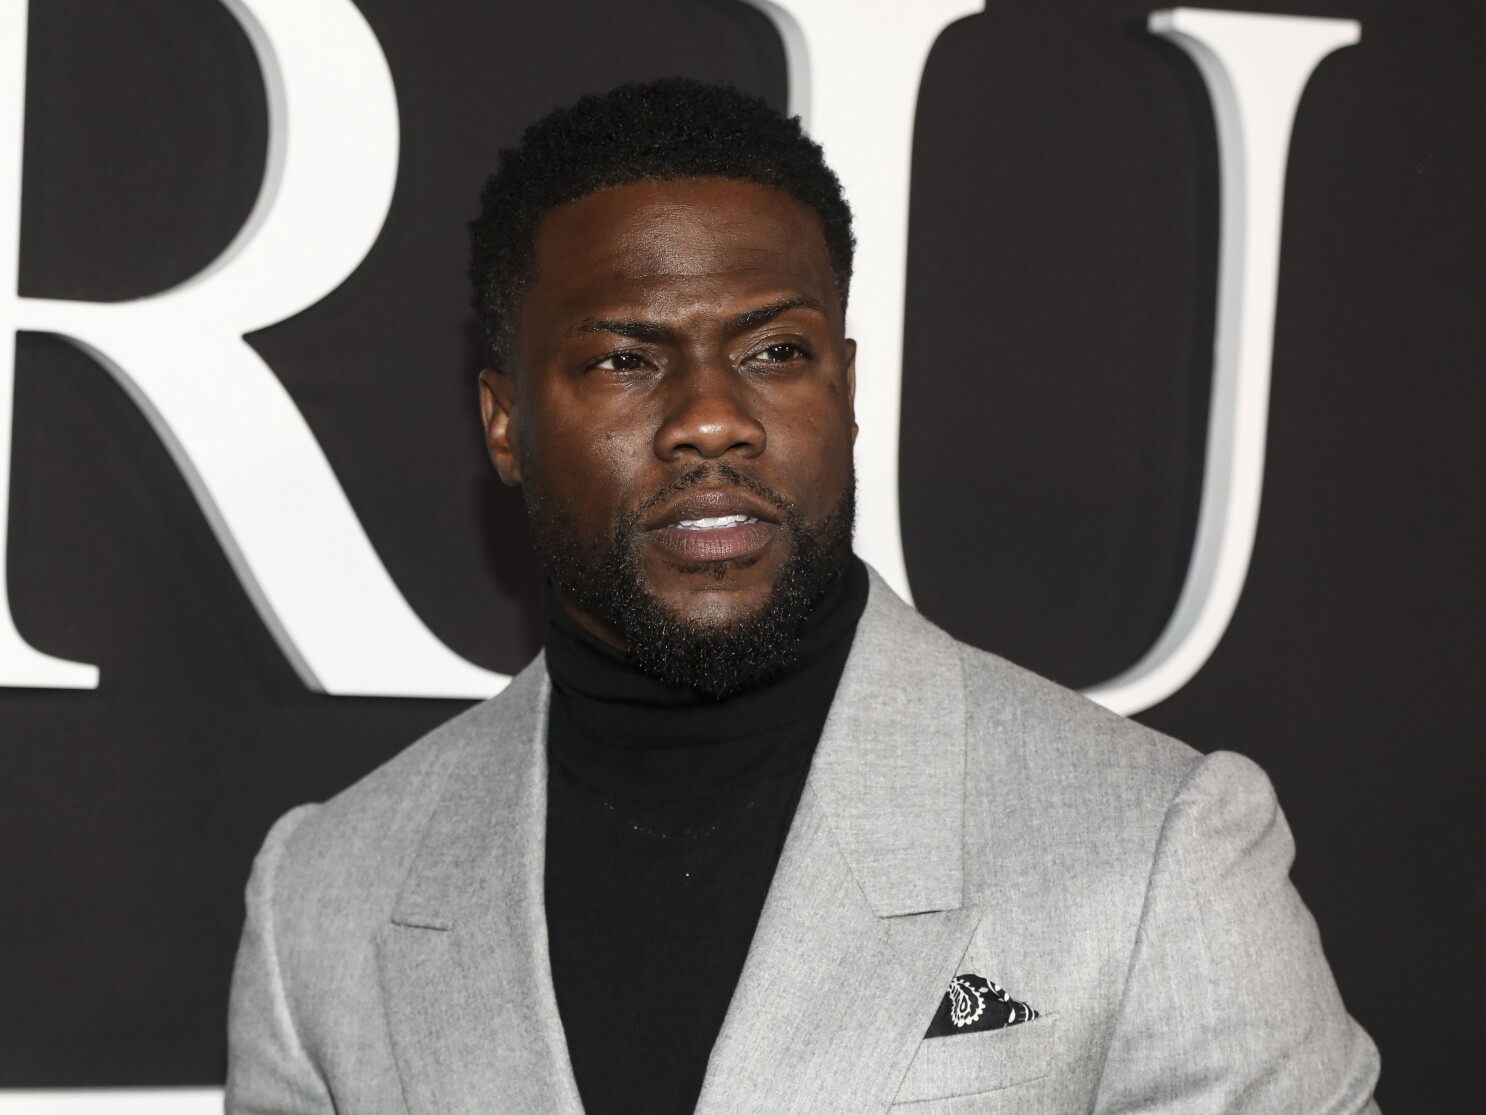 Kevin Hart wearing a grey suit in an event ceremony